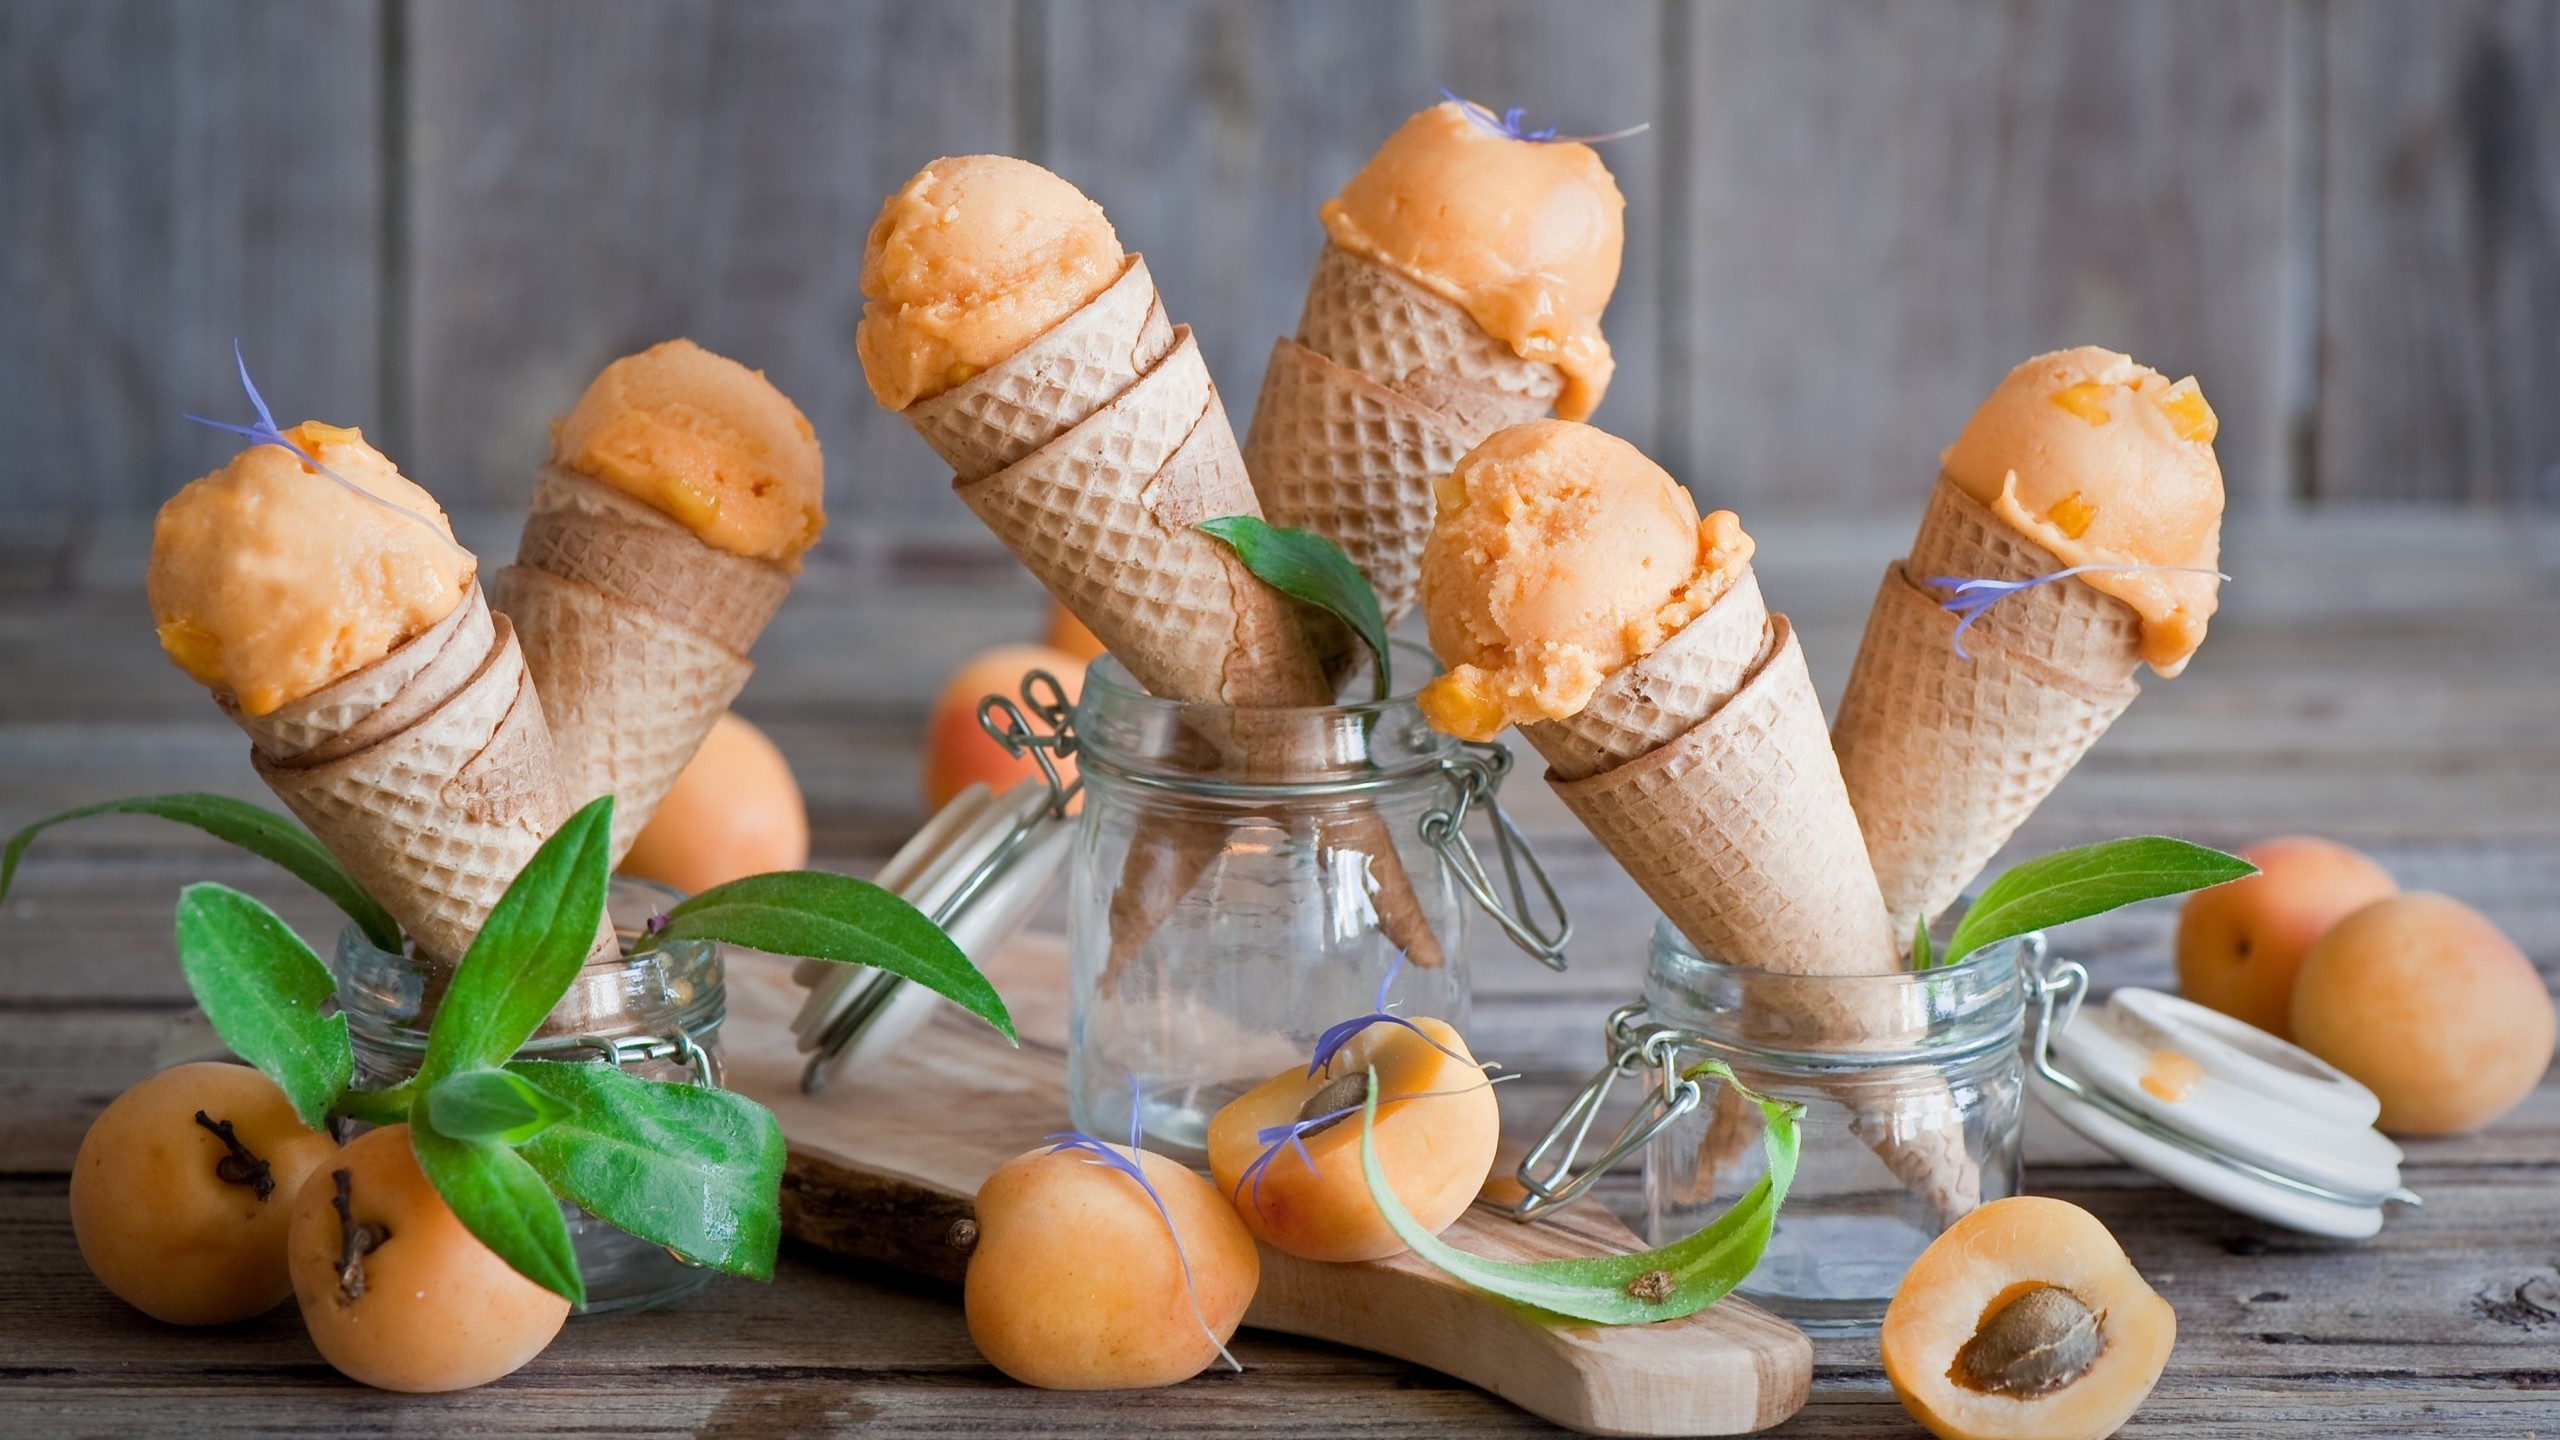 Apricot Ice Cream for 2560x1440 HDTV resolution